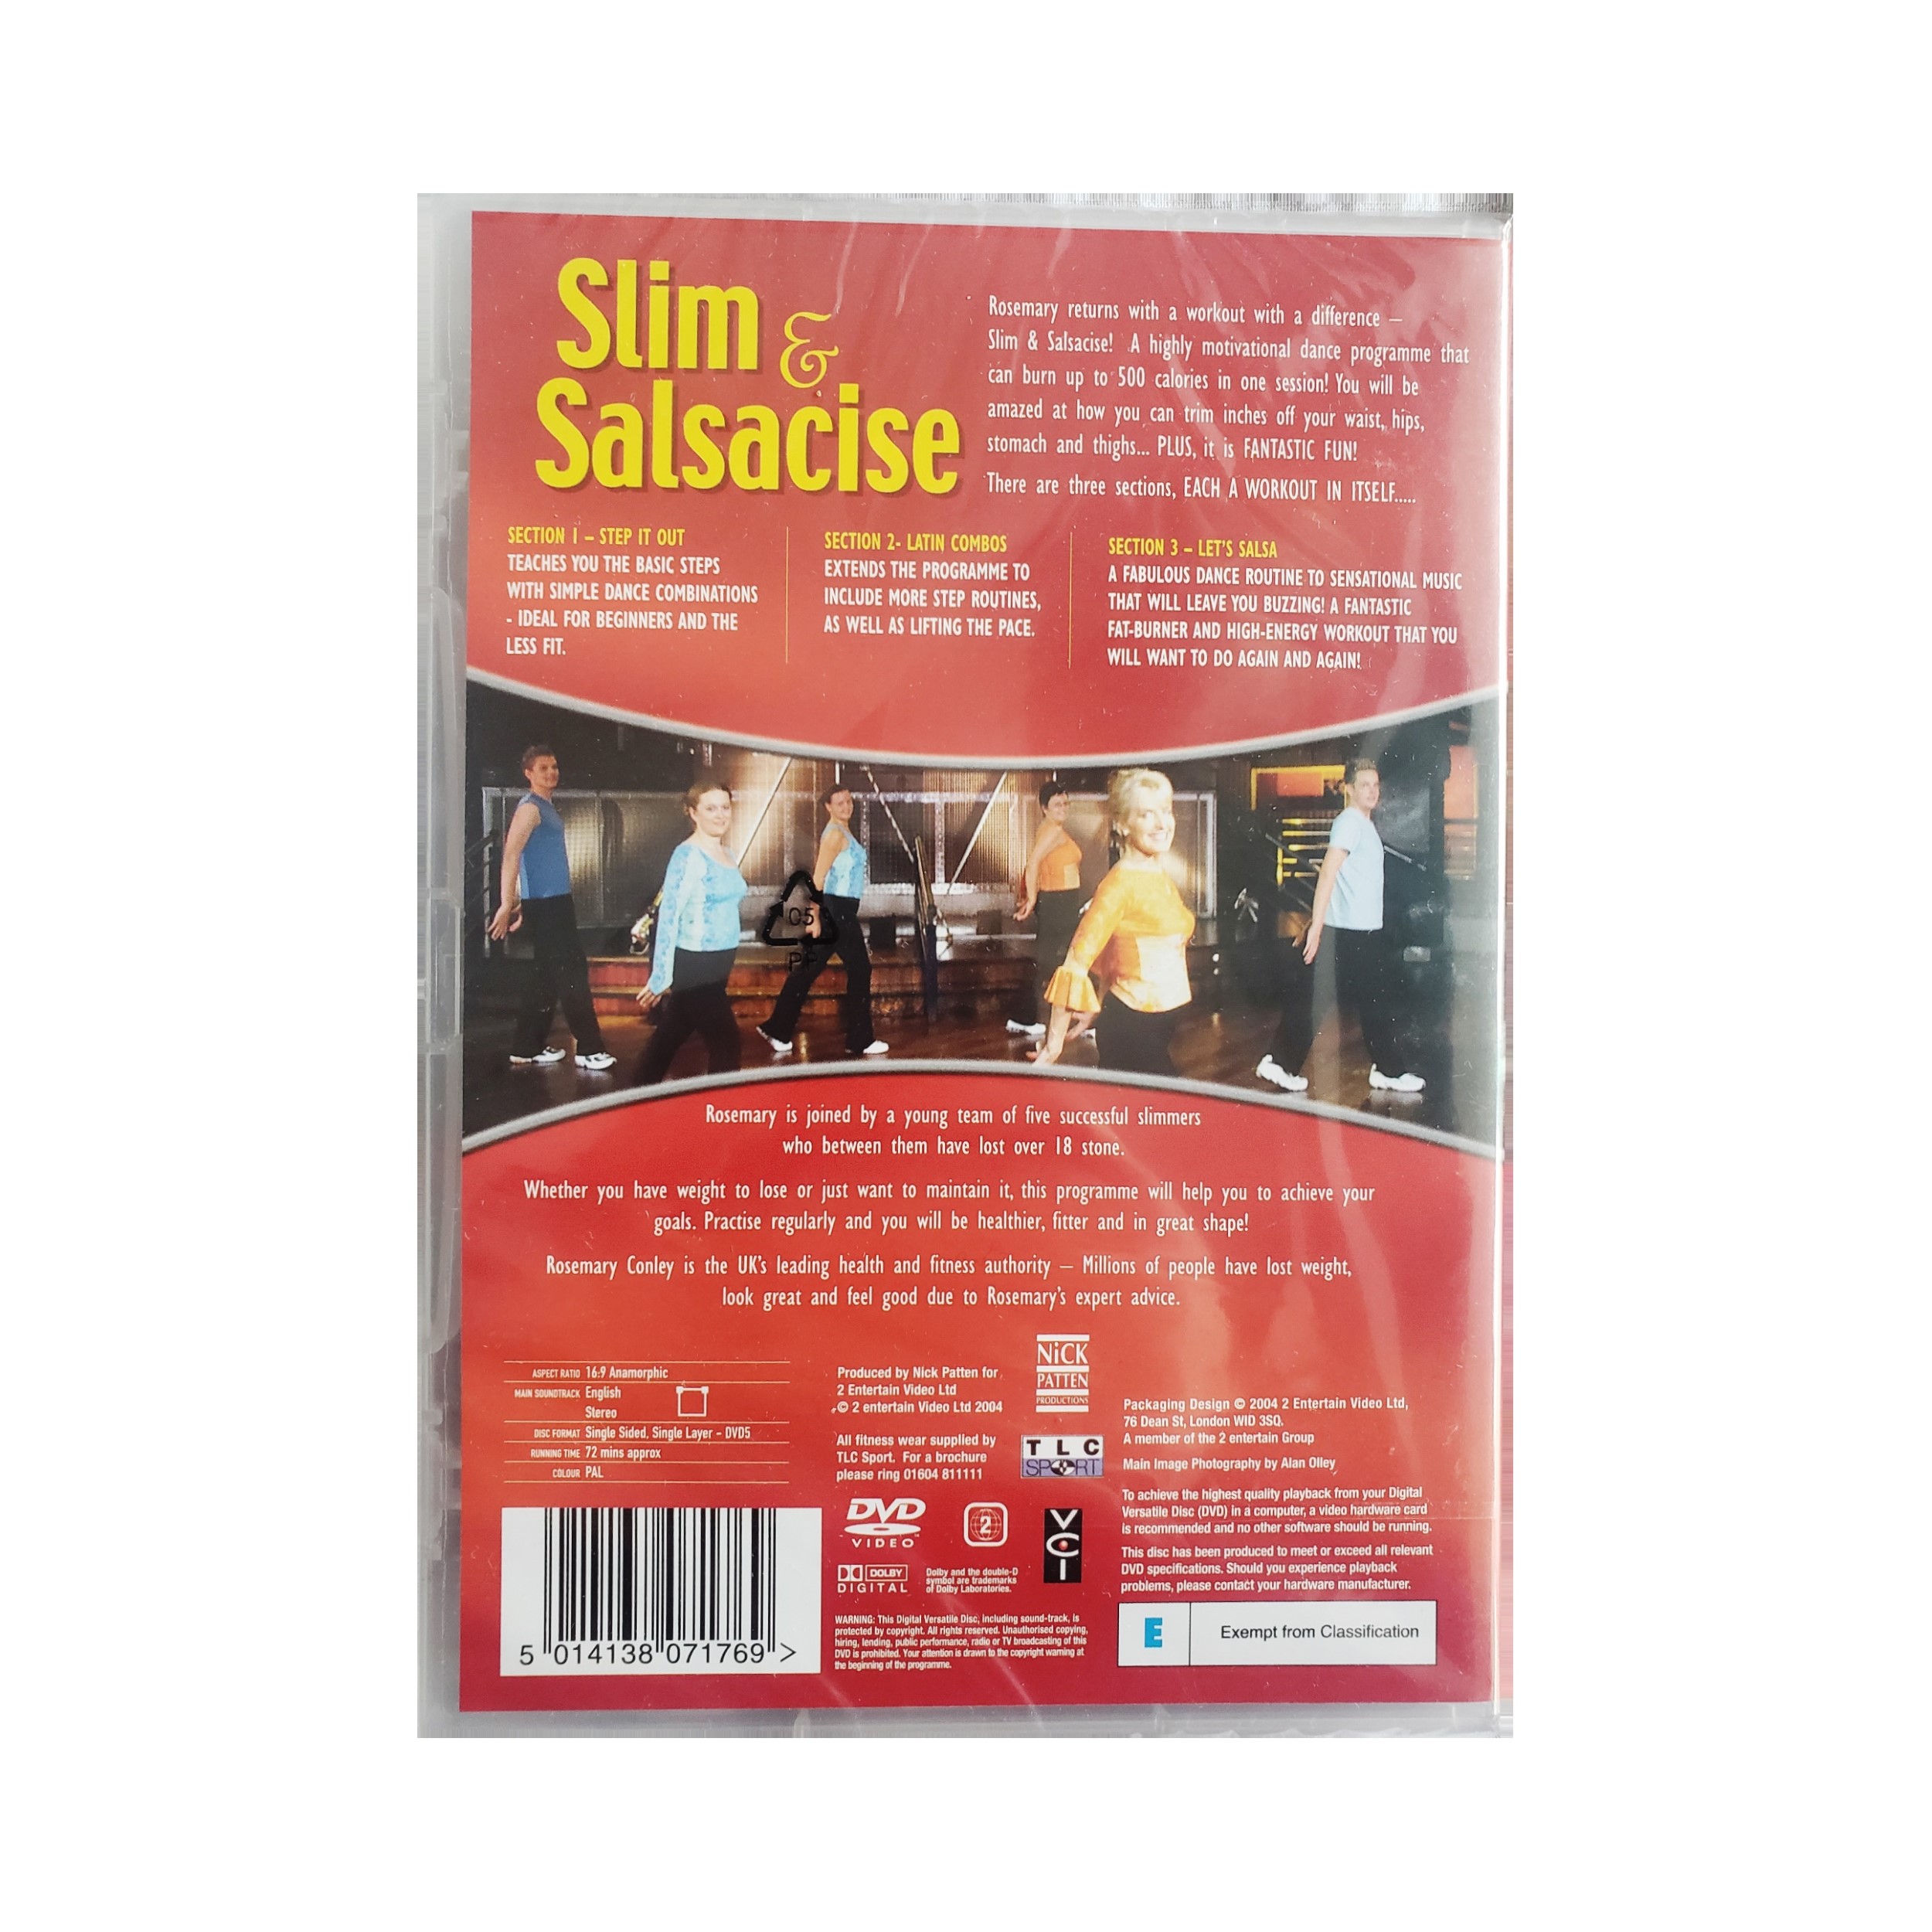 Image of the back cover of Rosemary Conley's Slim & Salsacise DVD